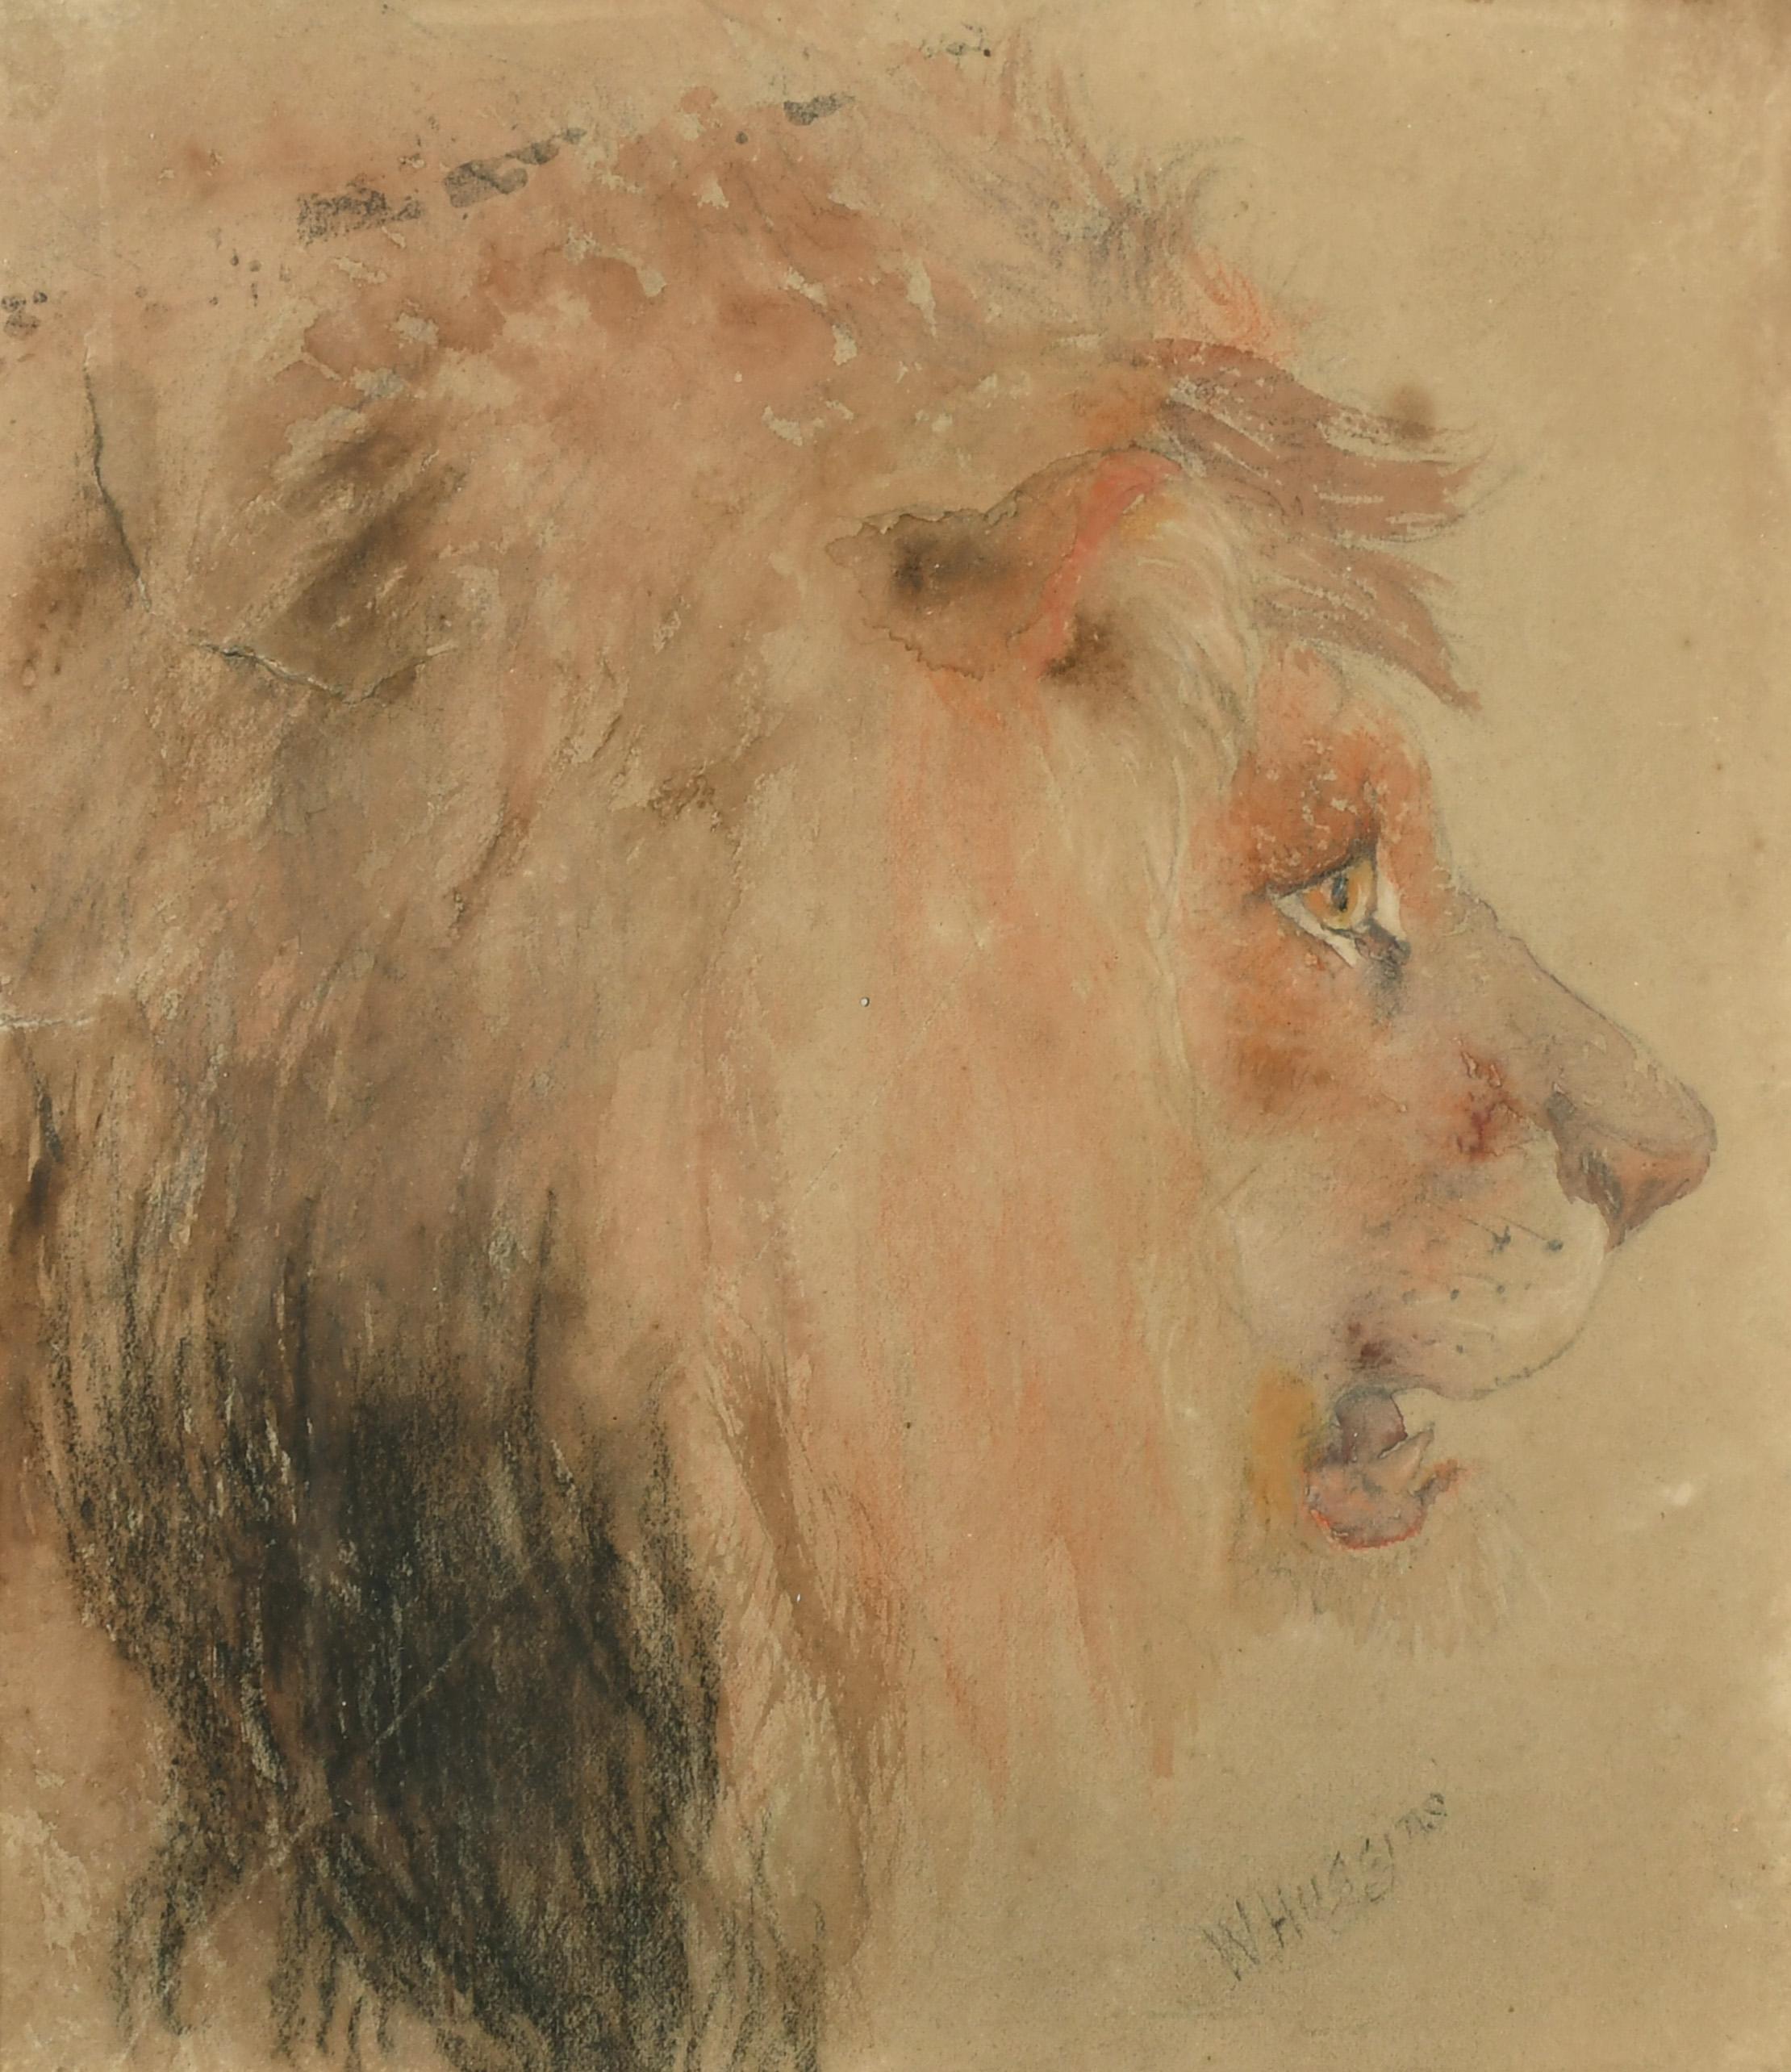 19th century English chalk drawing on paper of a Lions head - Art by William Huggins